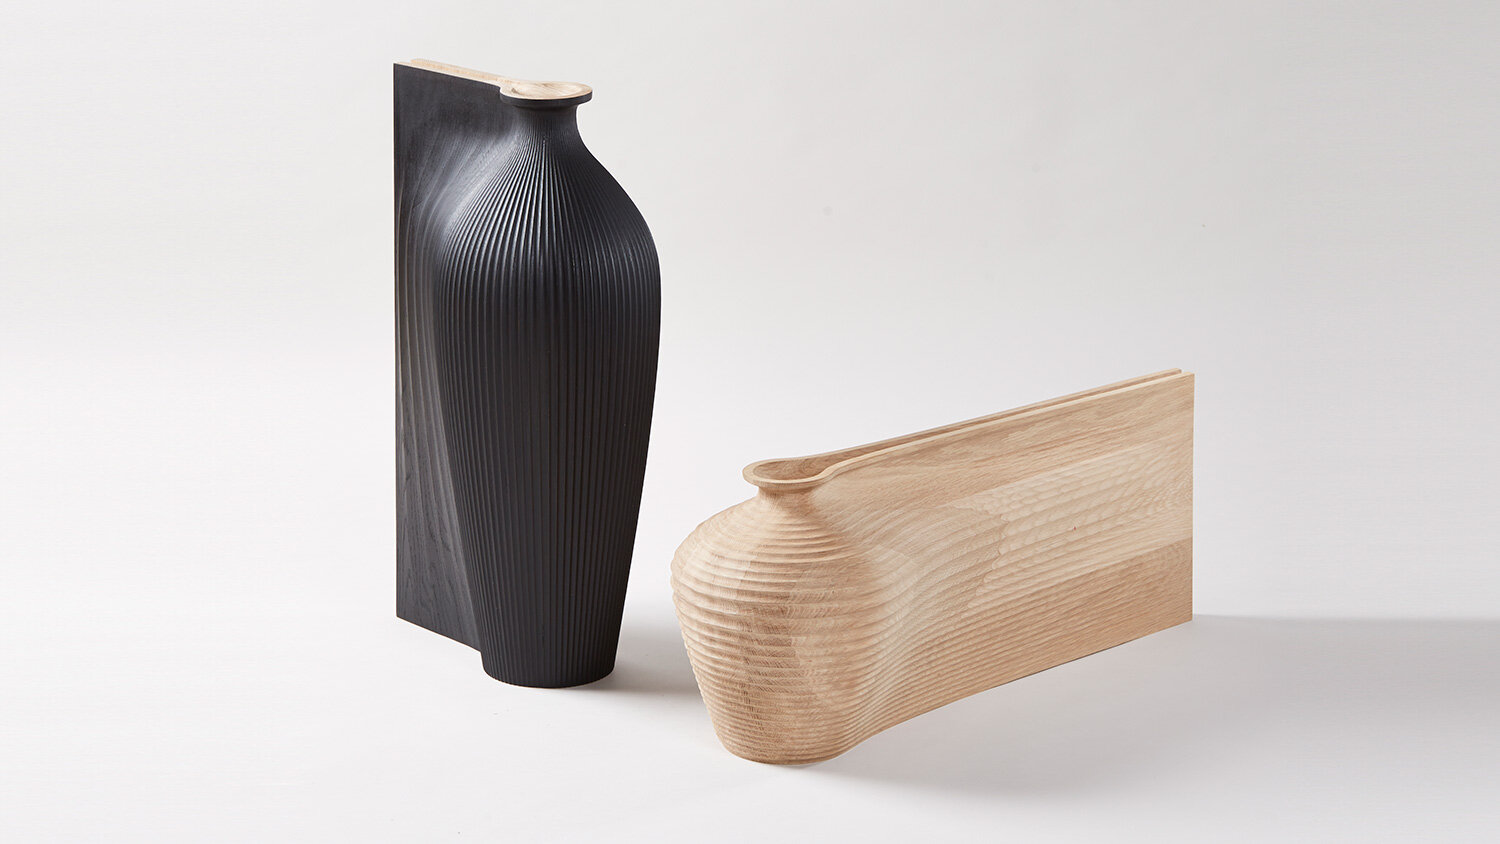 Two wooden computer printed objects